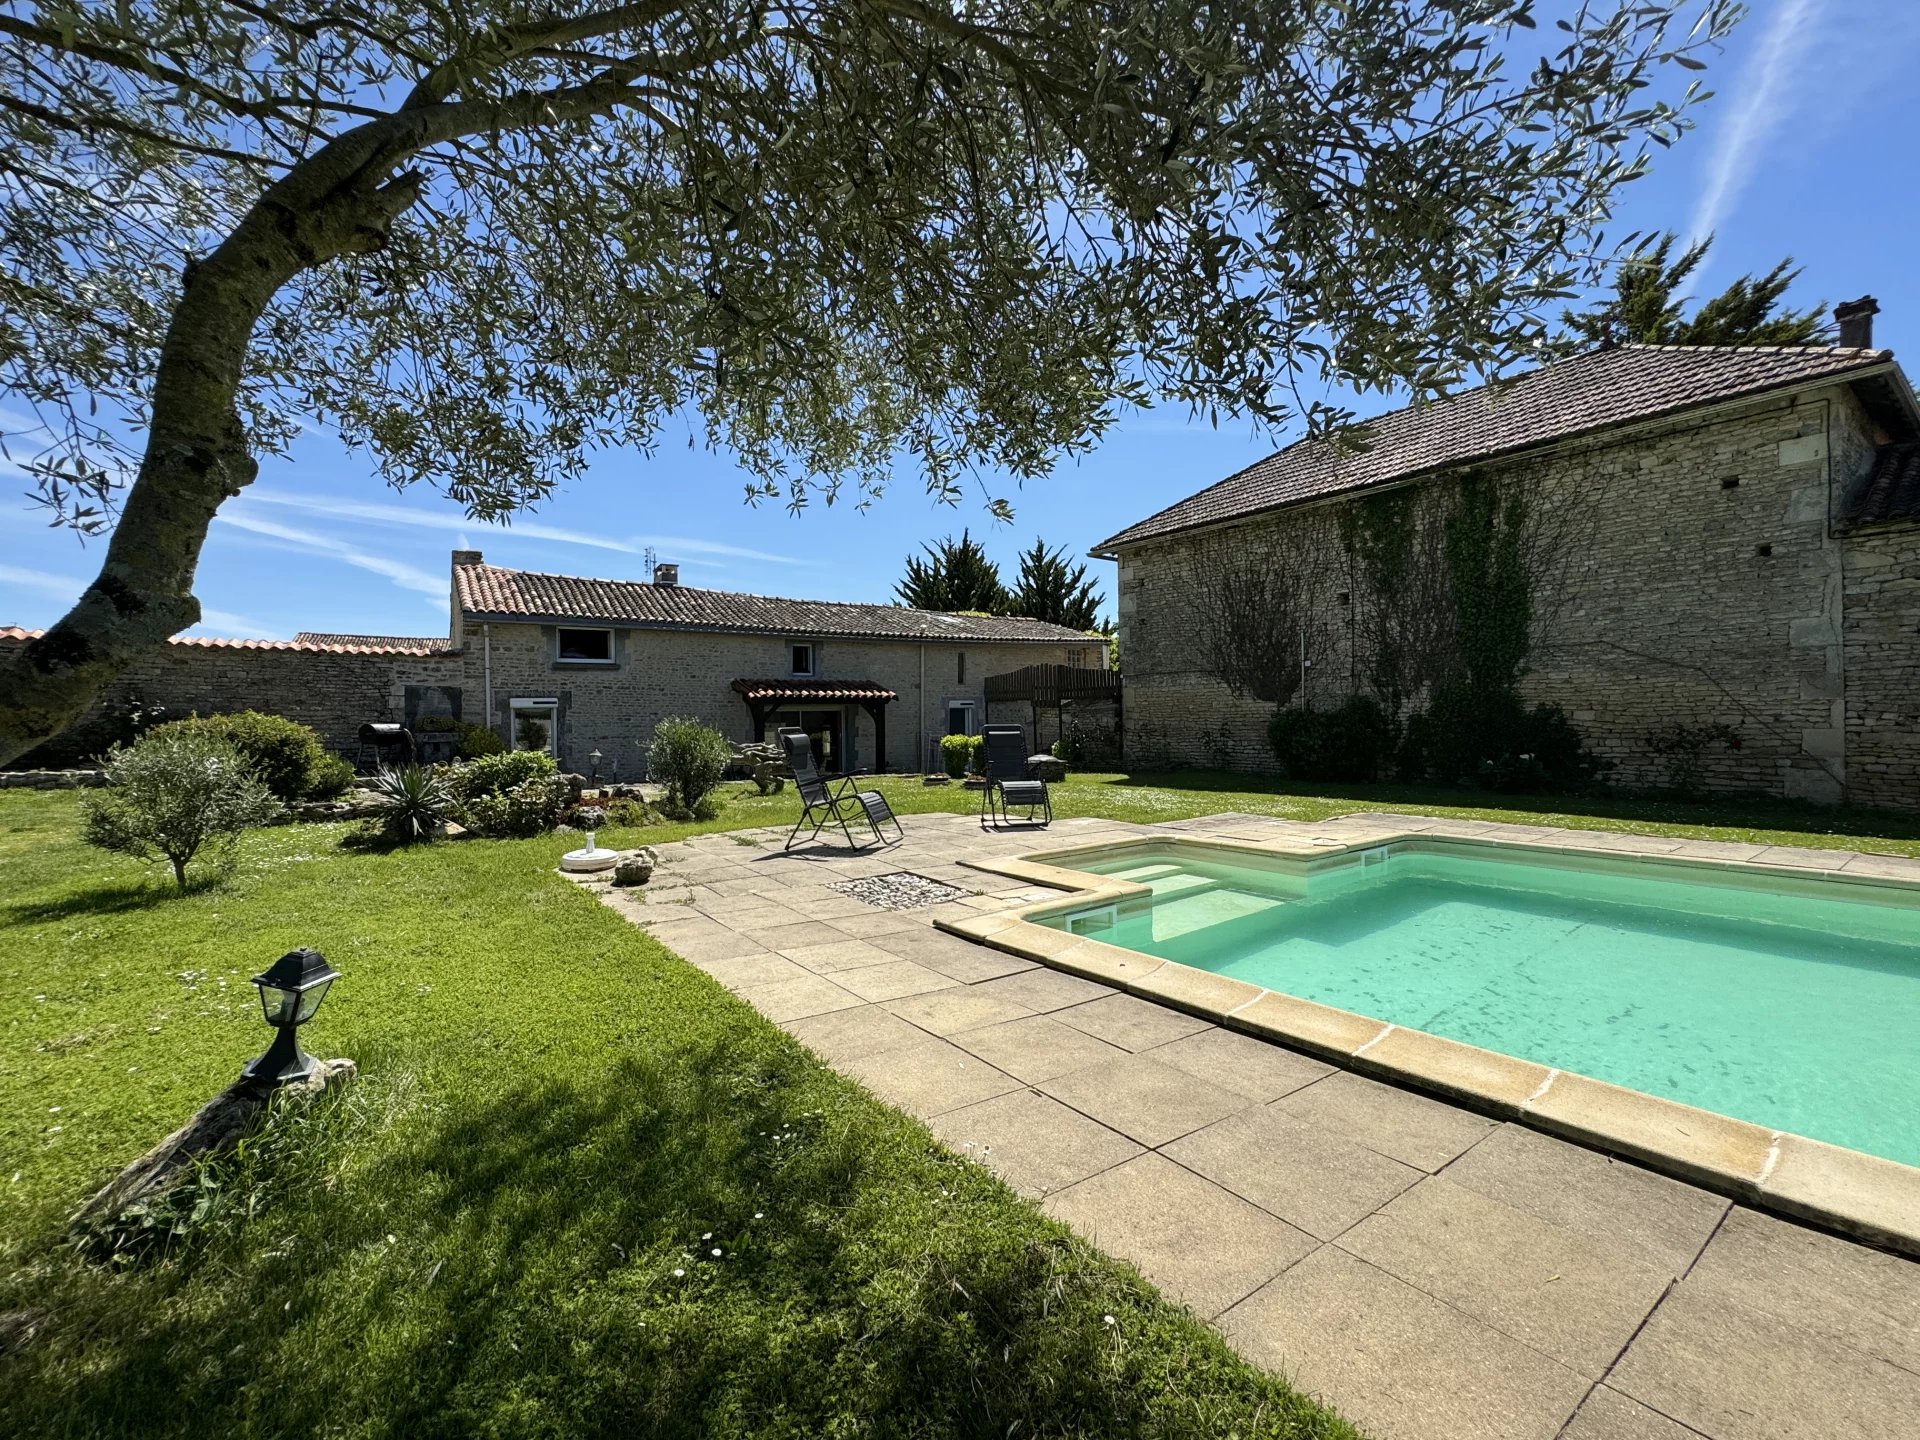 Charming 3 bedroom property, pool and potential gîte, close to all amenities